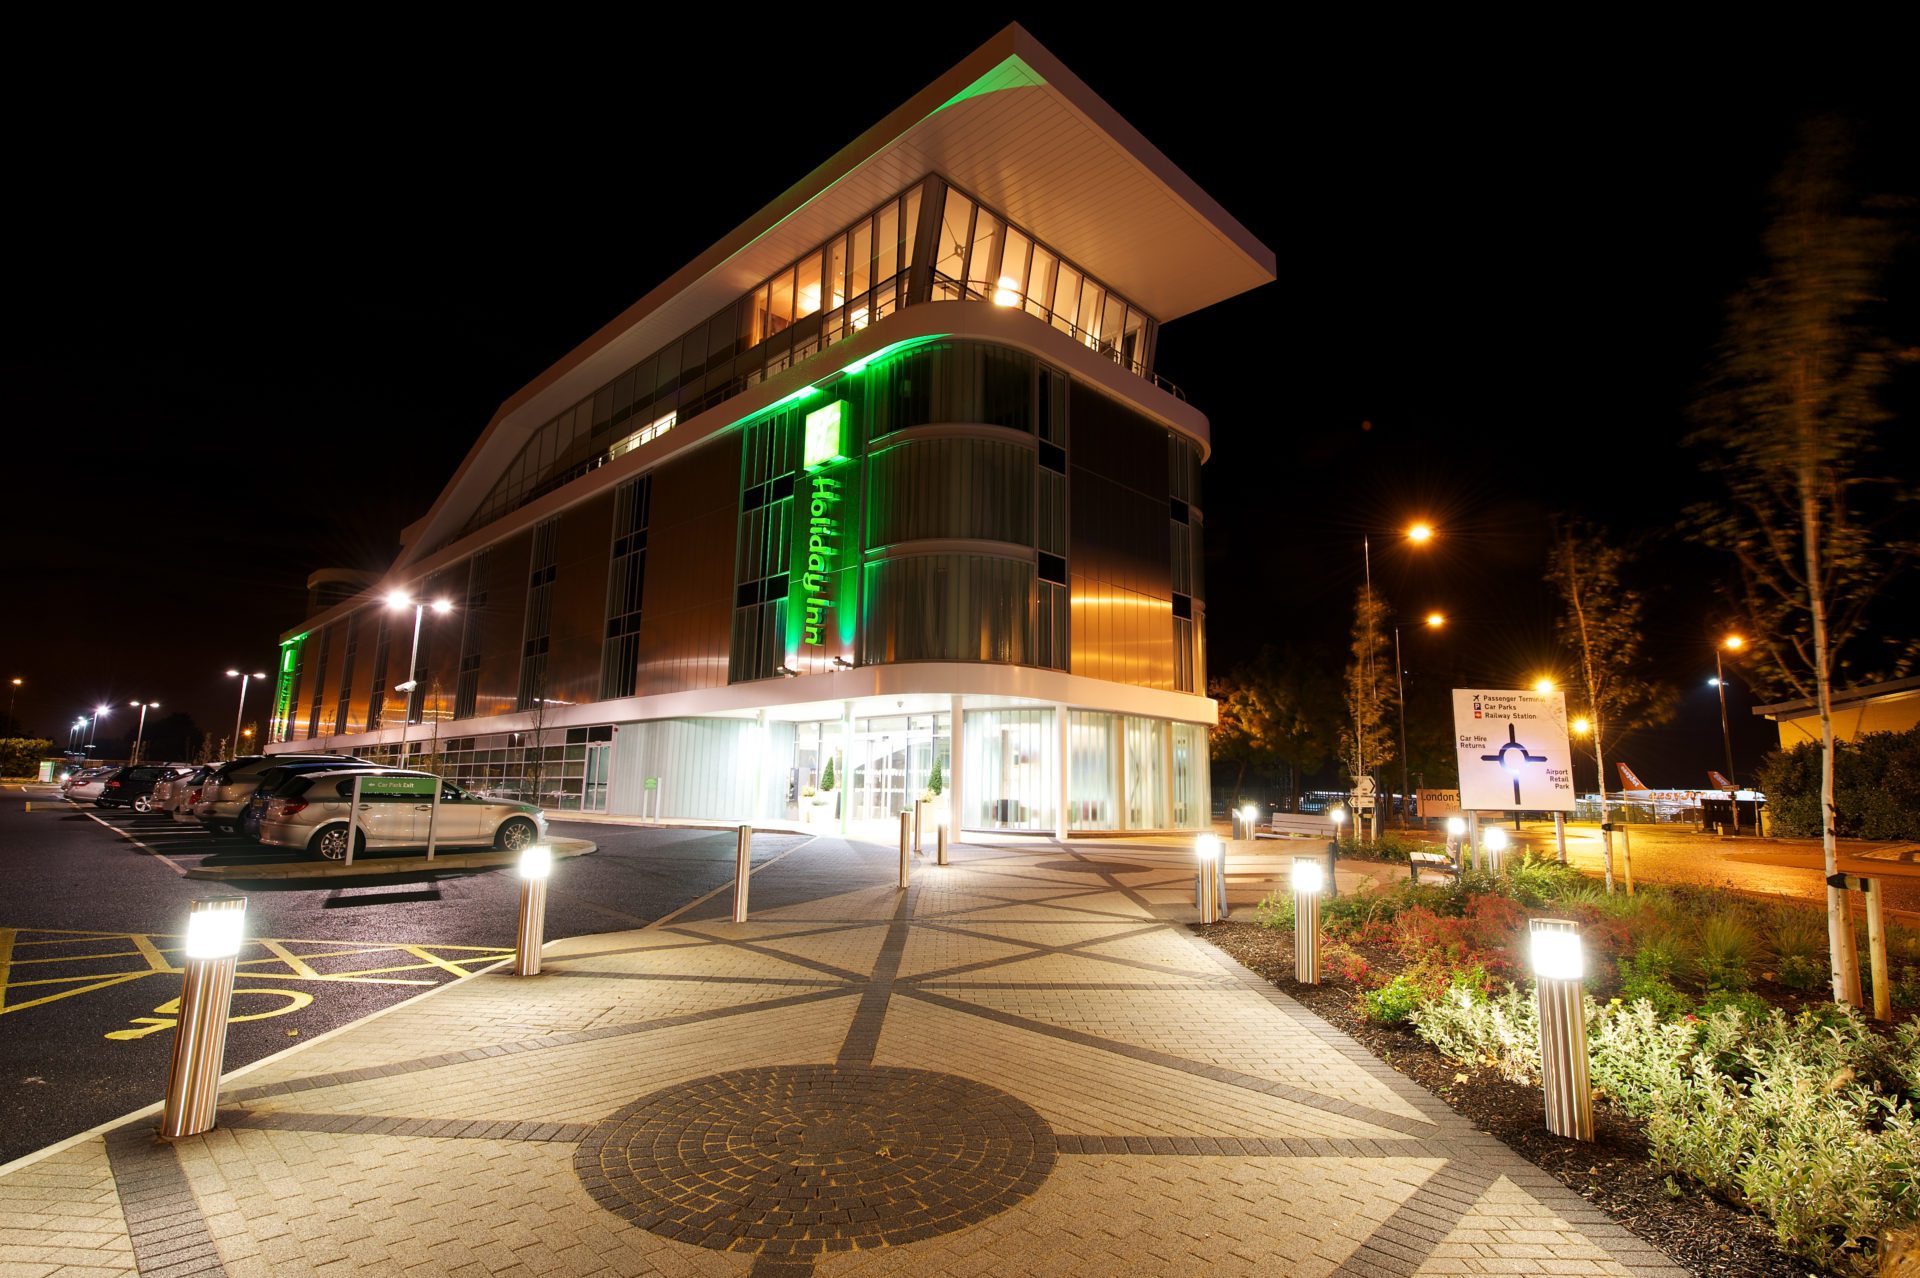 The Holiday Inn at night at London Southend Airport